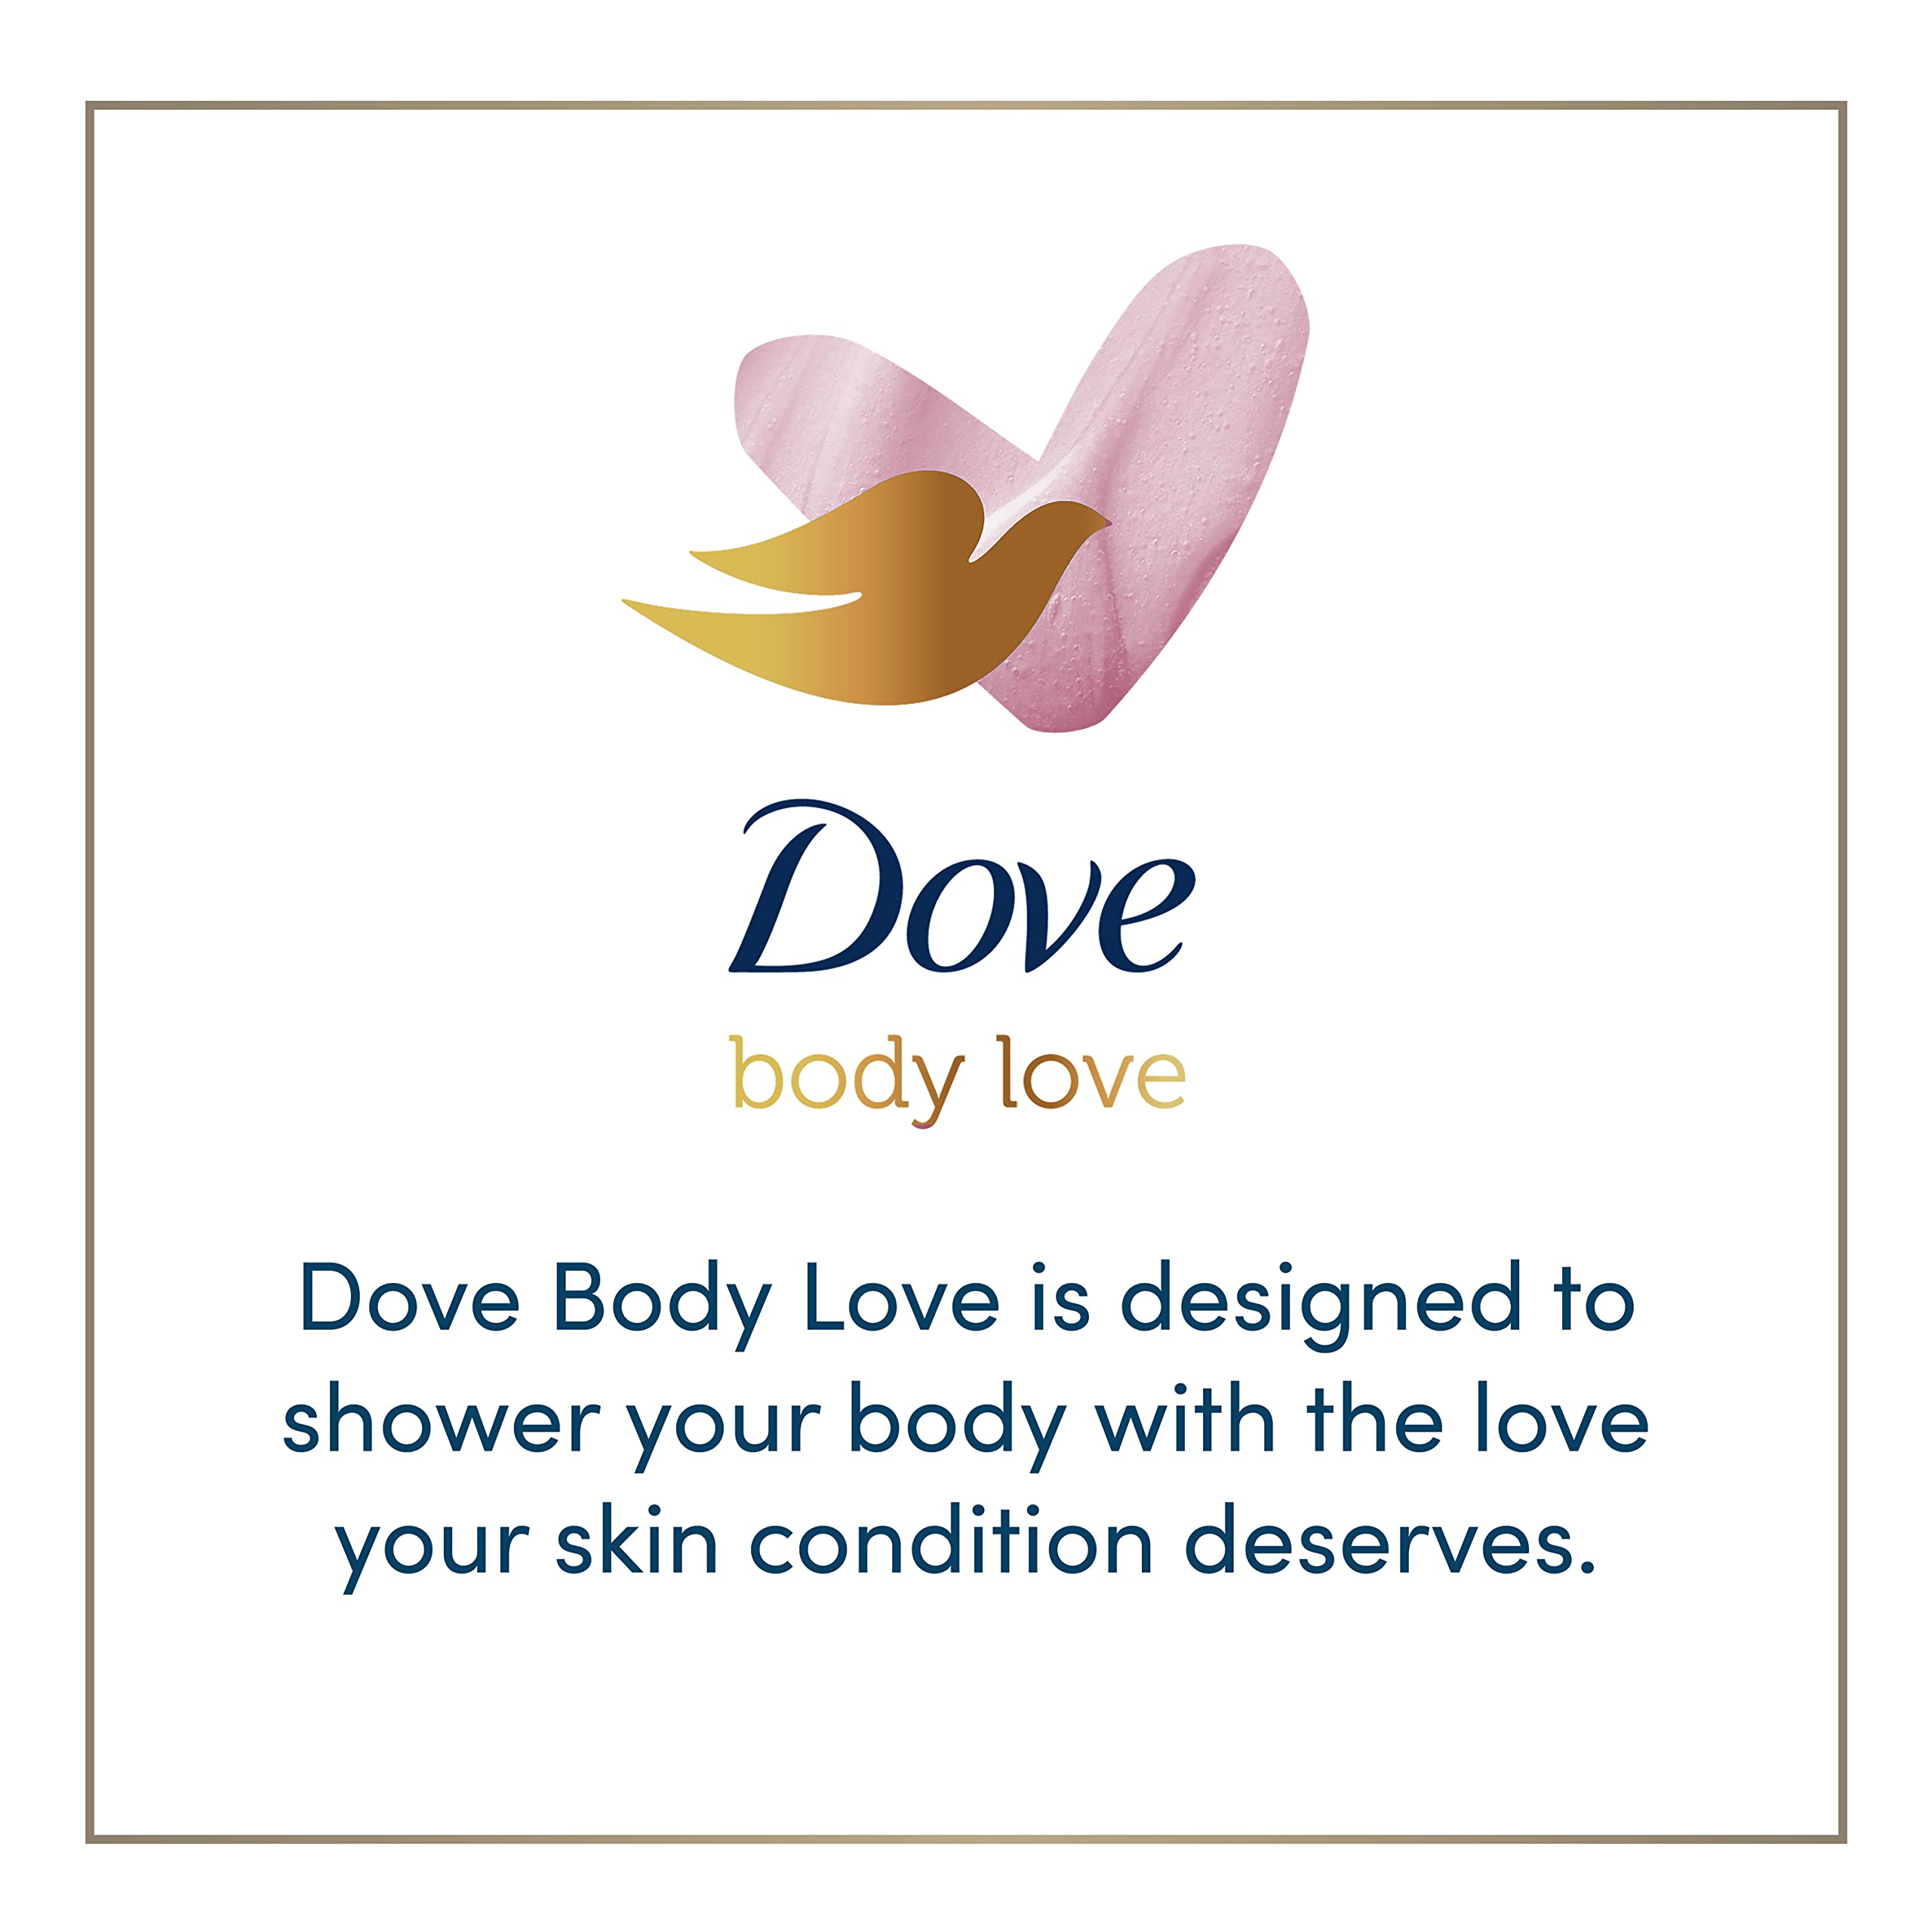 Dove Body Love Body Cleanser Reaction-Prone Skin 3 Count Hyper-Reactive Skin Balance for Ultra-Sensitive Fragrance Free Body Wash with Only 12 Ingredients 17.5 oz